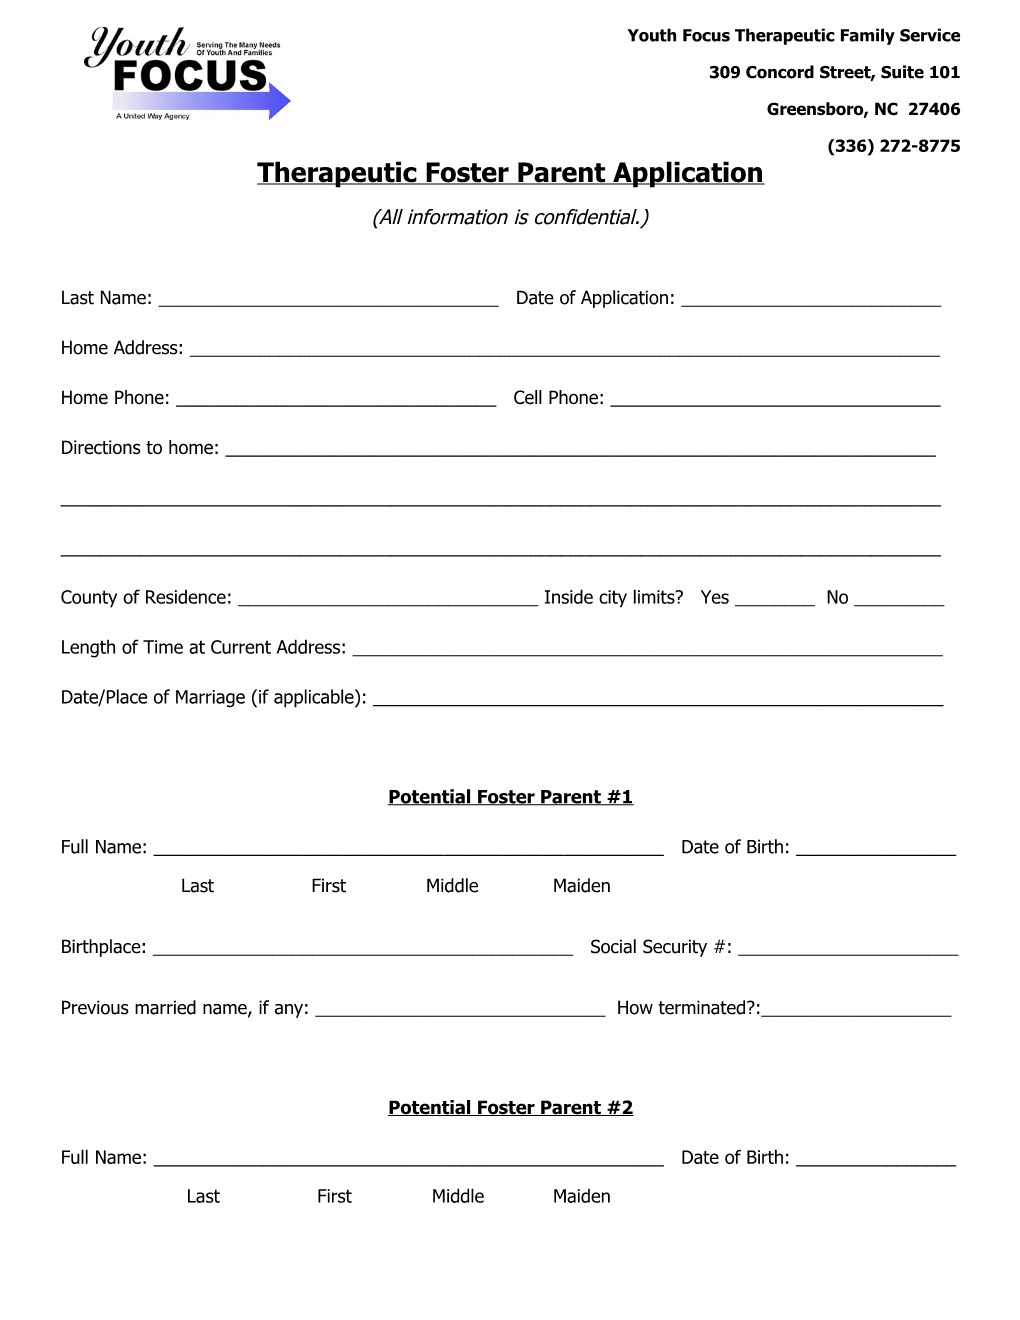 Therapeutic Foster Parent Application